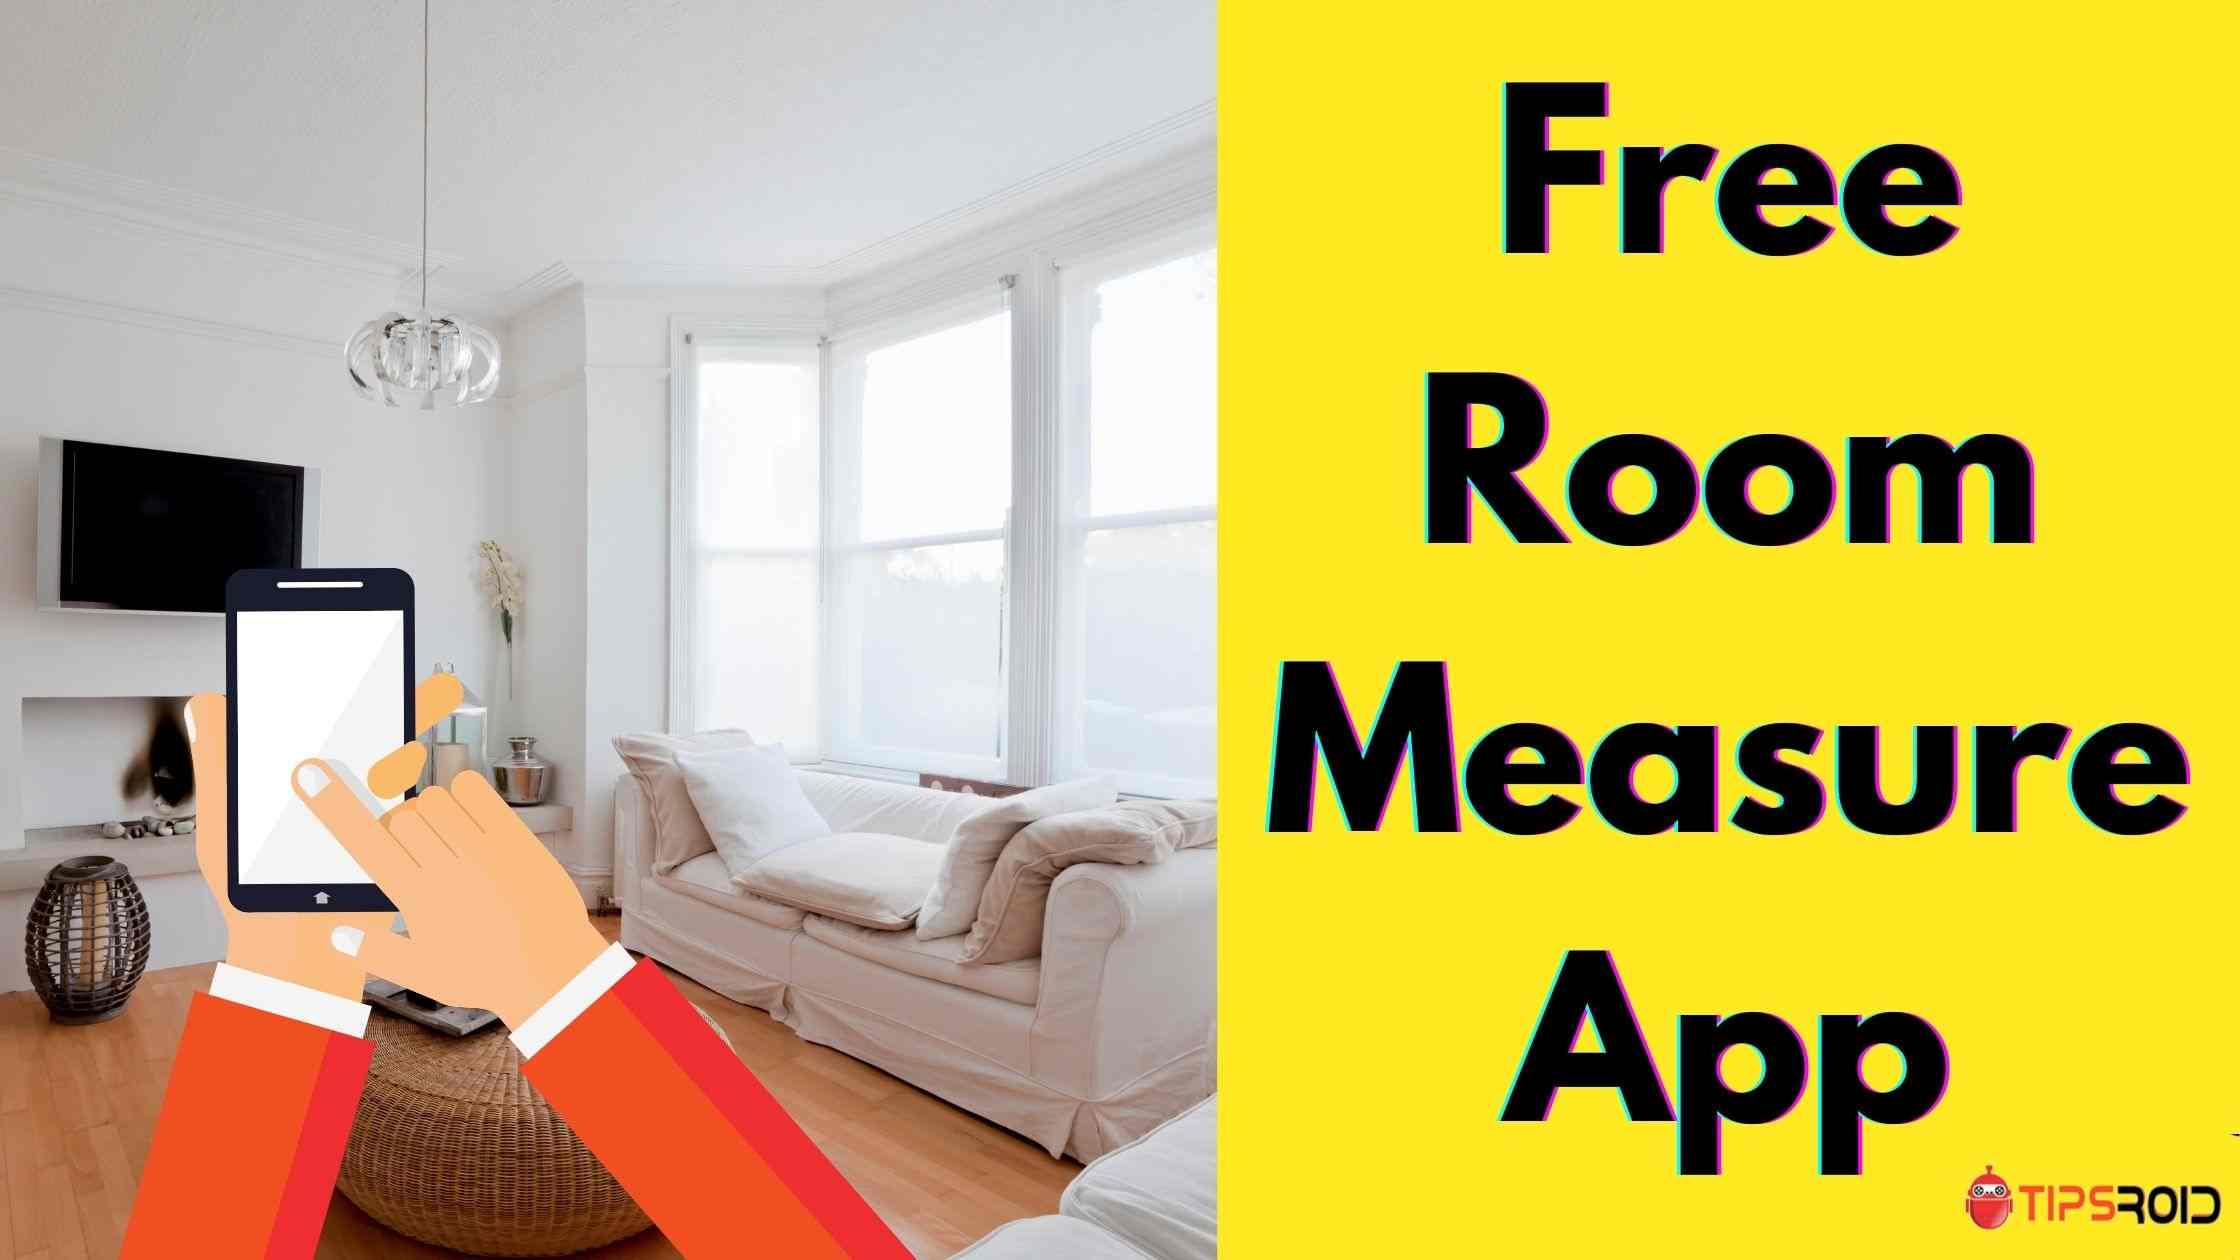 11 Free Room Measure App For Android And iPhone